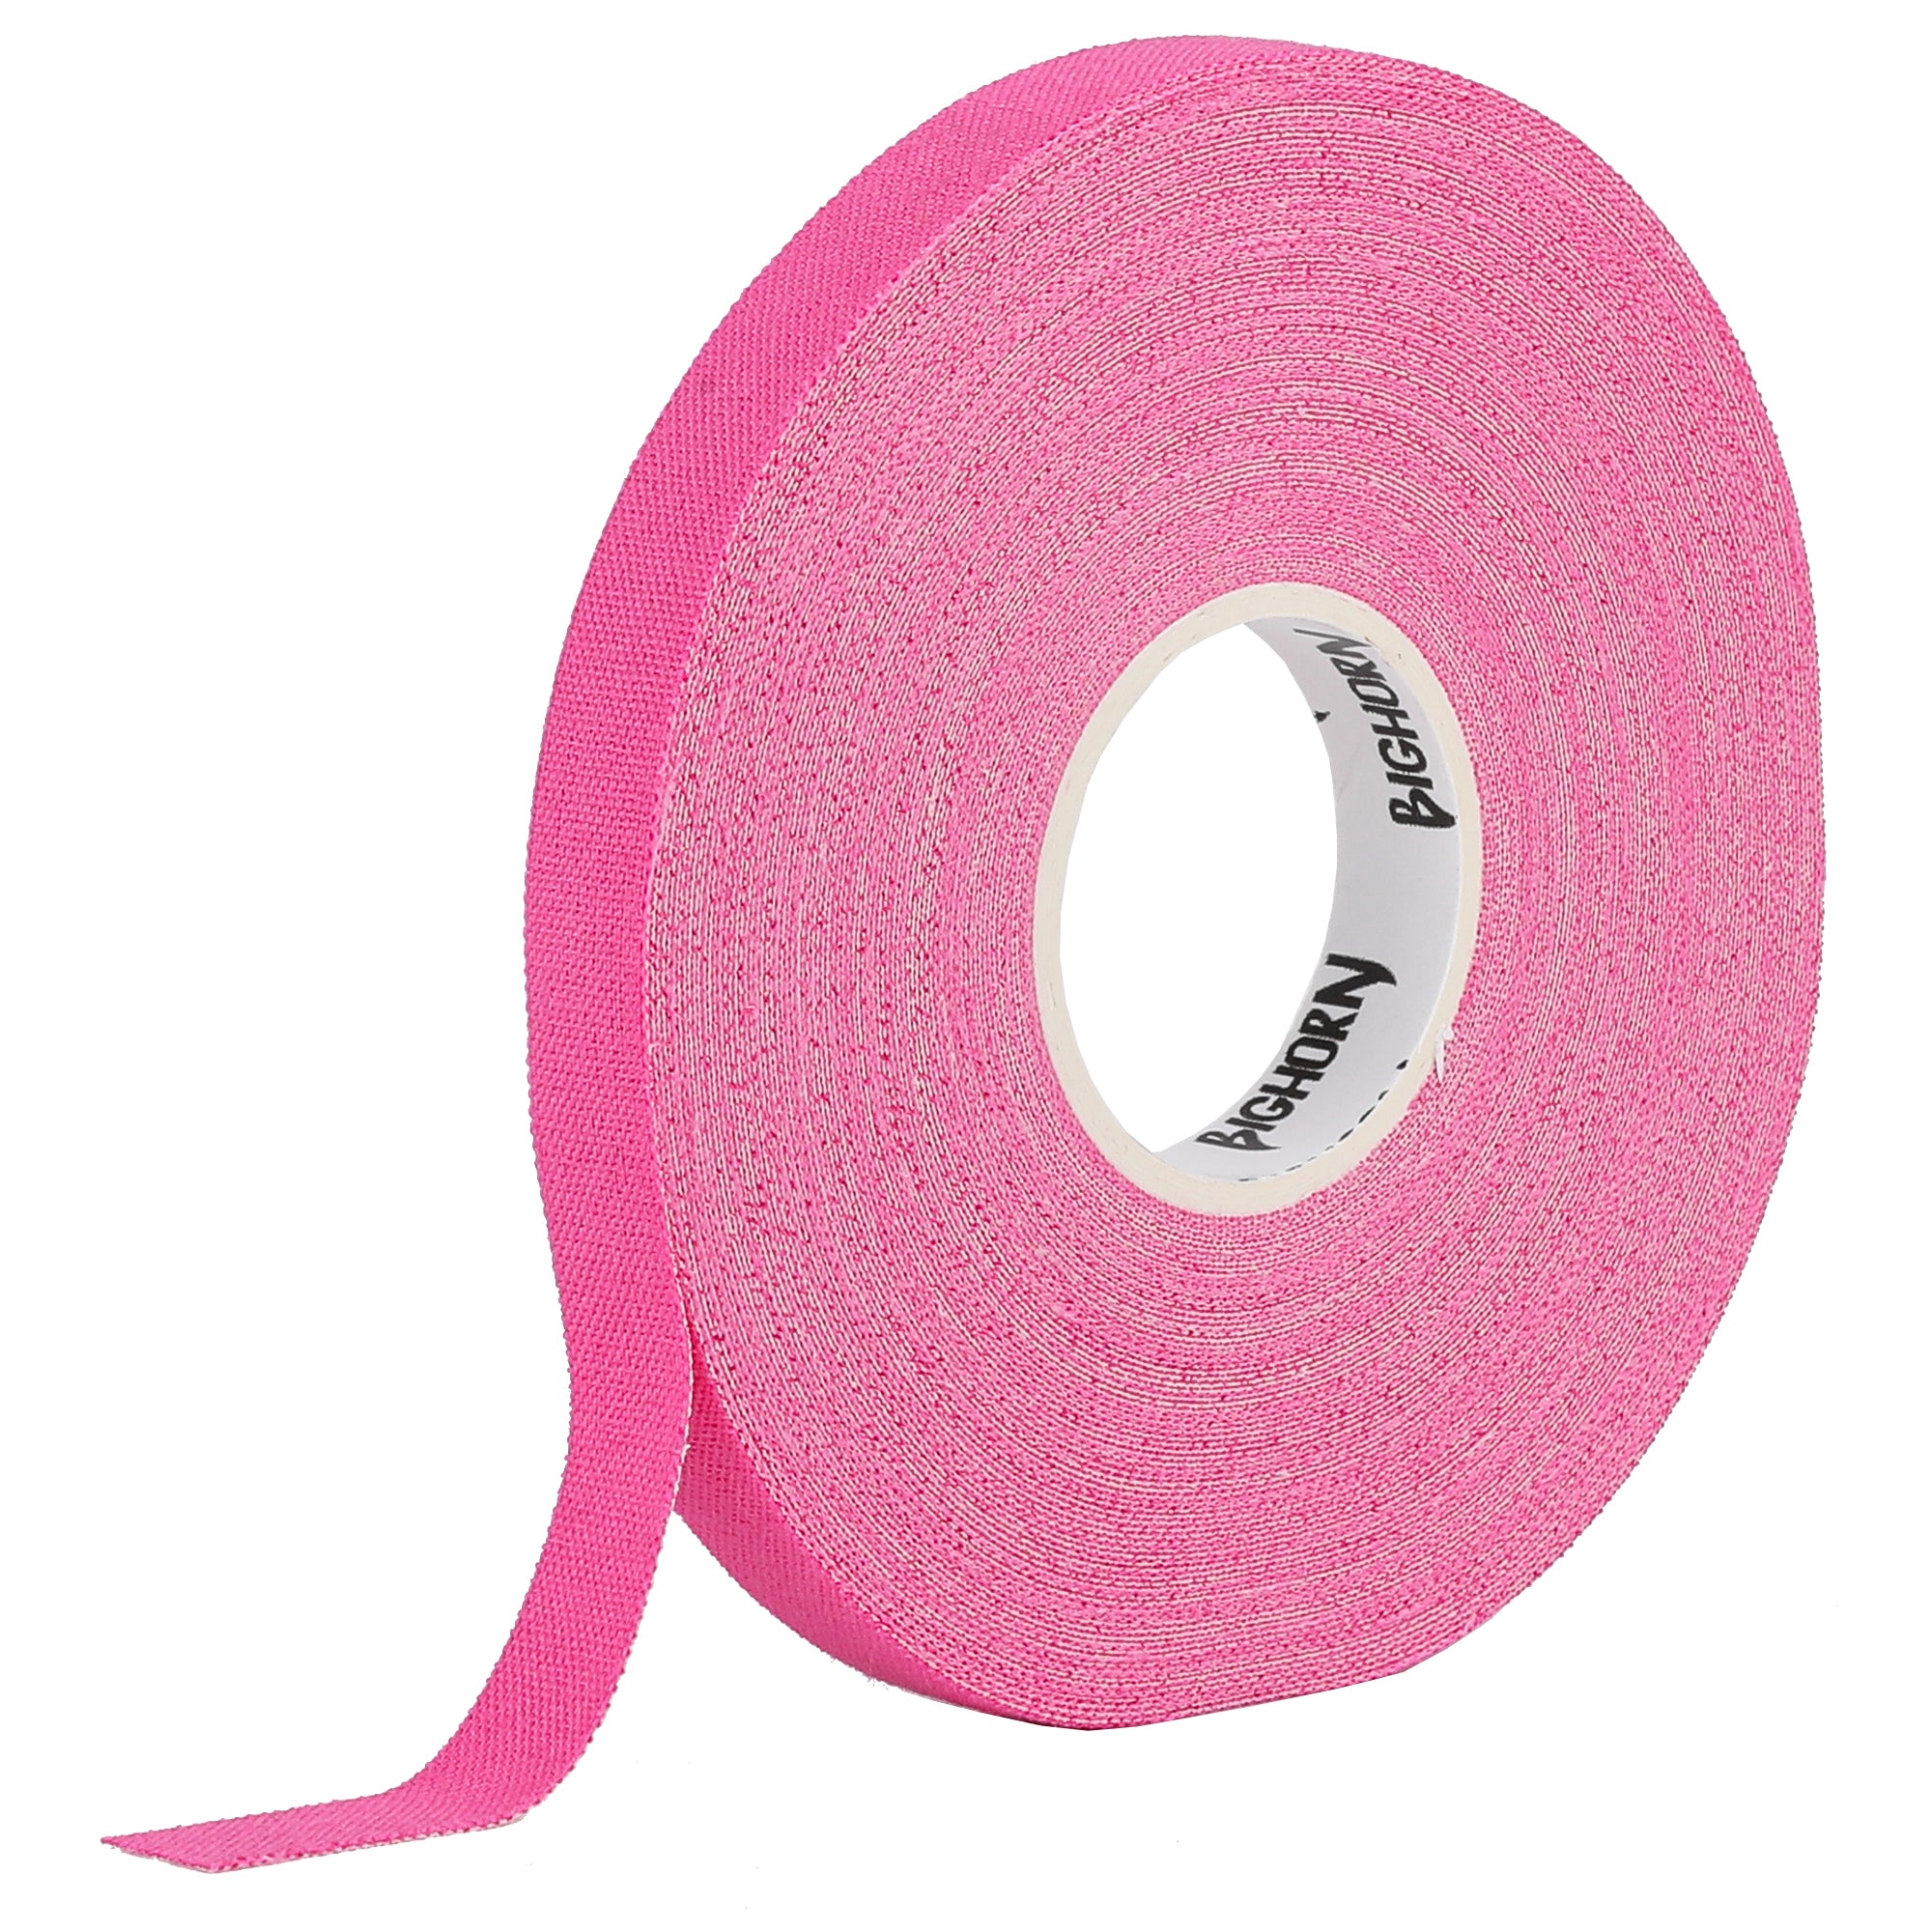 Premium Competition Finger Tape, 4-Rolls, 0.3-Inch, Black, White, Pink, Nude